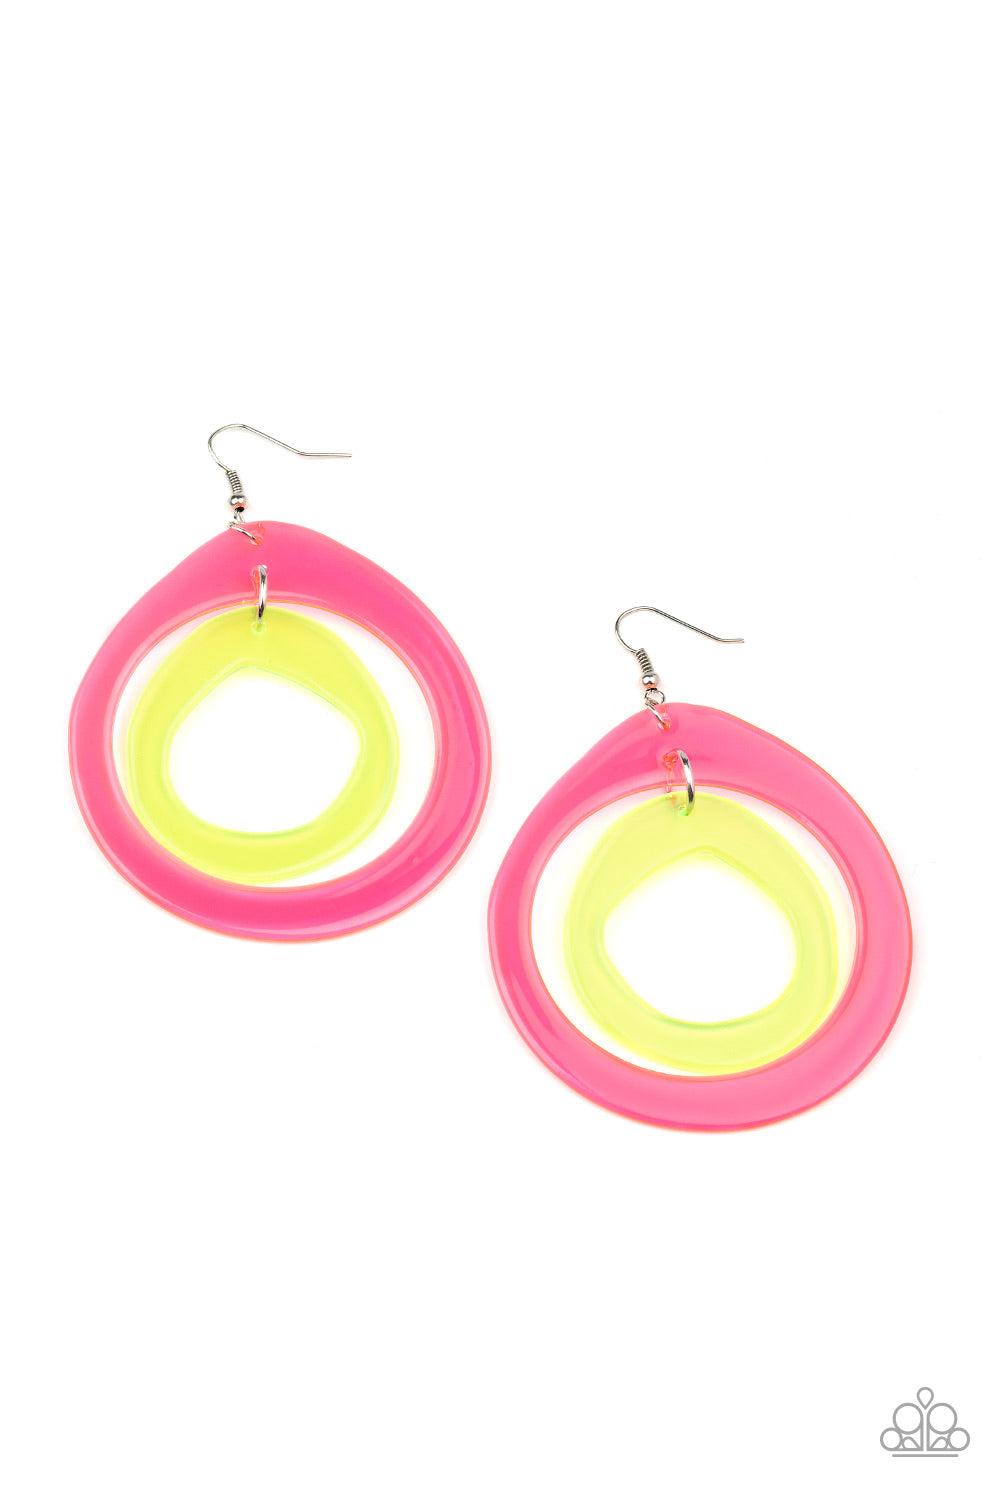 Paparazzi Accessories Show Your True NEONS - Multi Featuring asymmetrical shapes, neon pink and yellow acrylic hoops link into a dizzying lure for an out-of-this-world experience. Earring attaches to a standard fishhook fitting. Sold as one pair of earrin